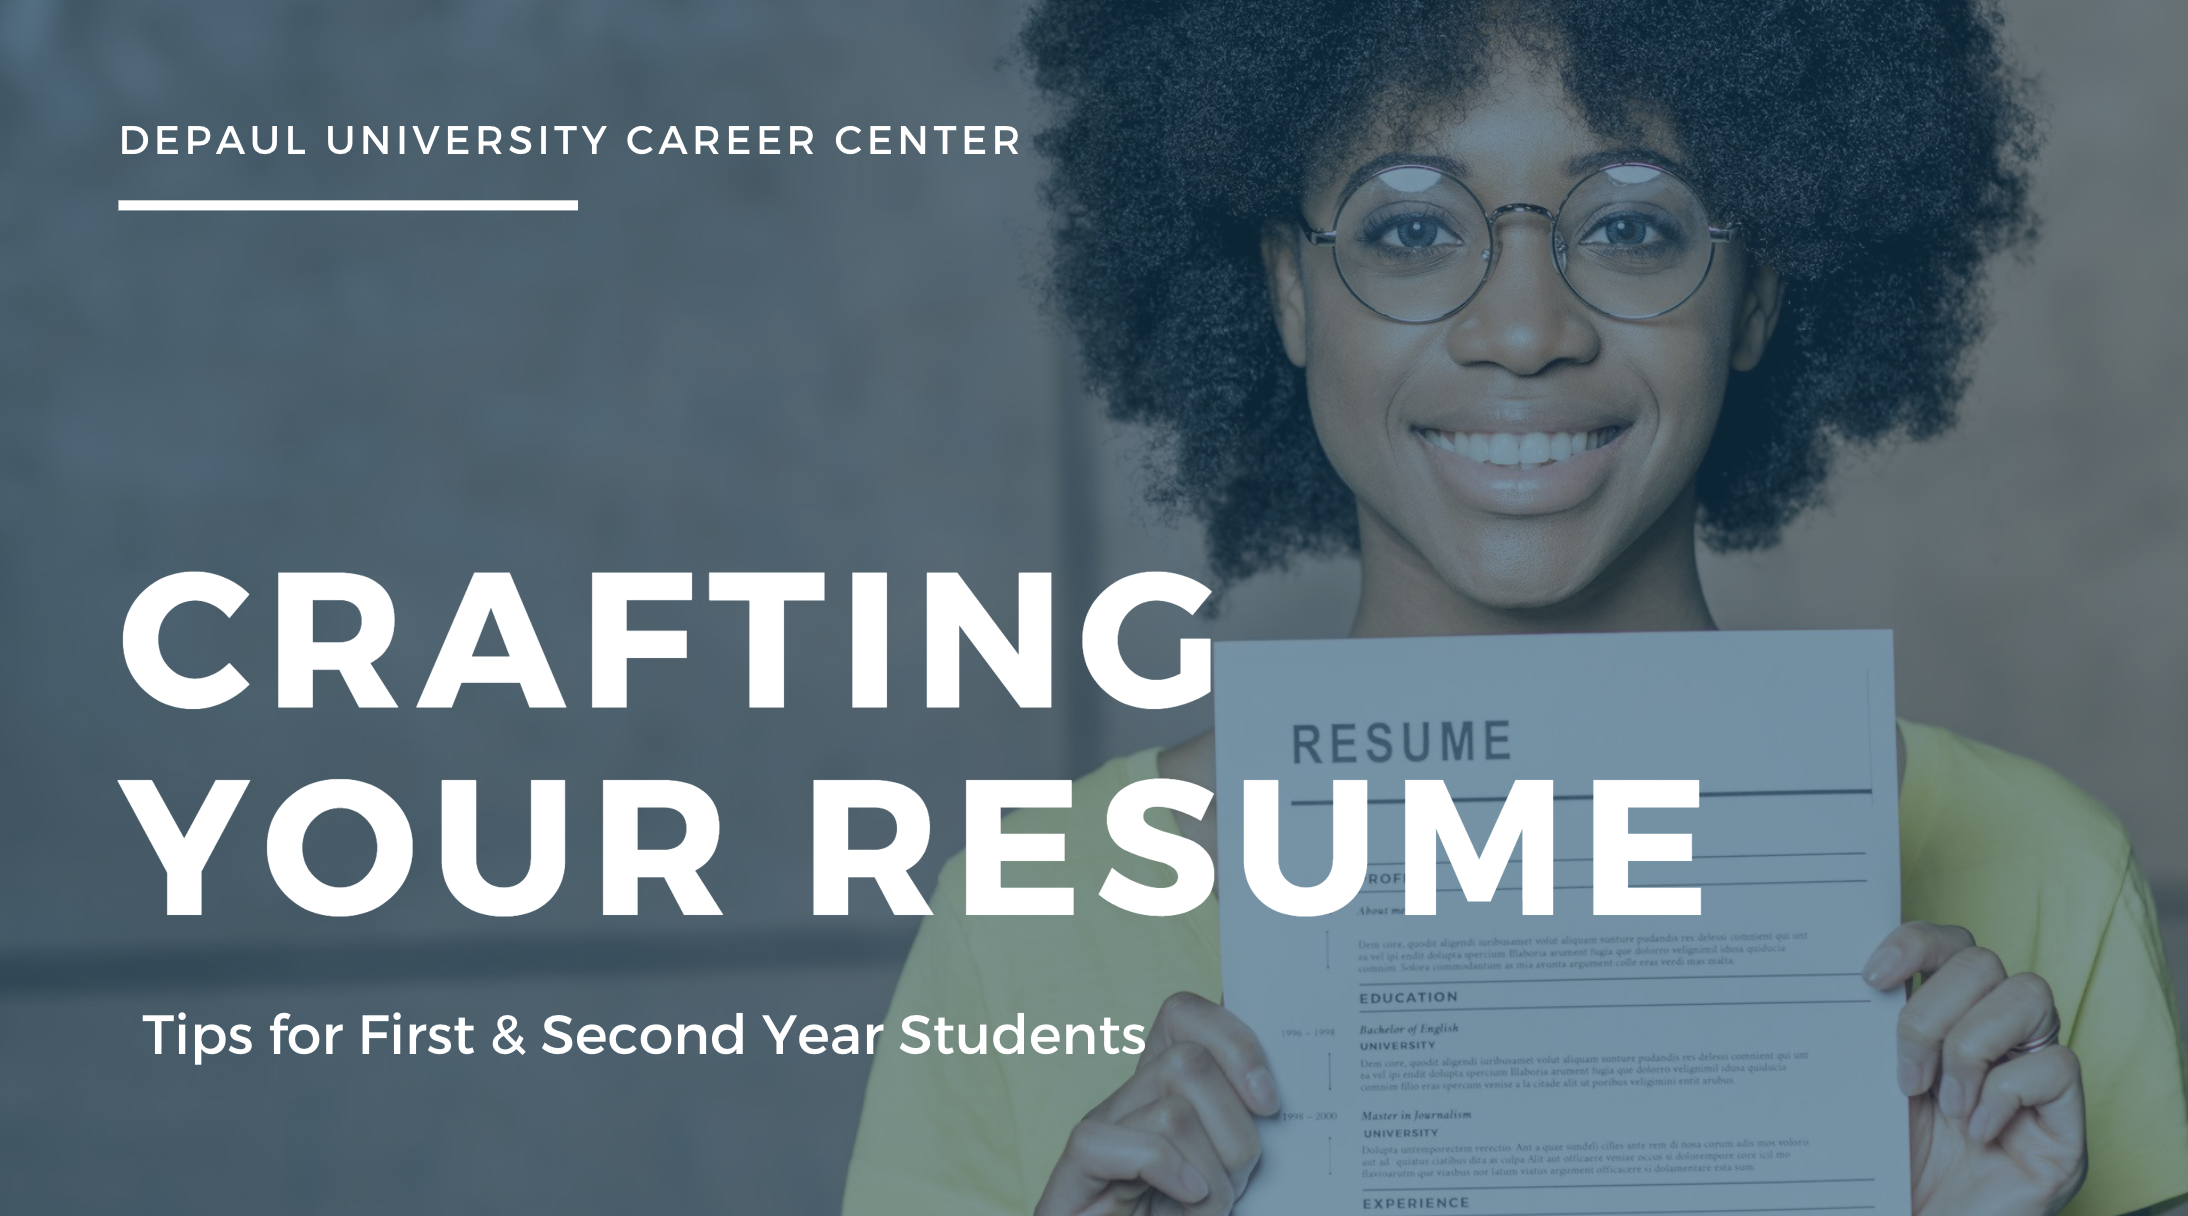 Resume Basics for First and Second Year Students